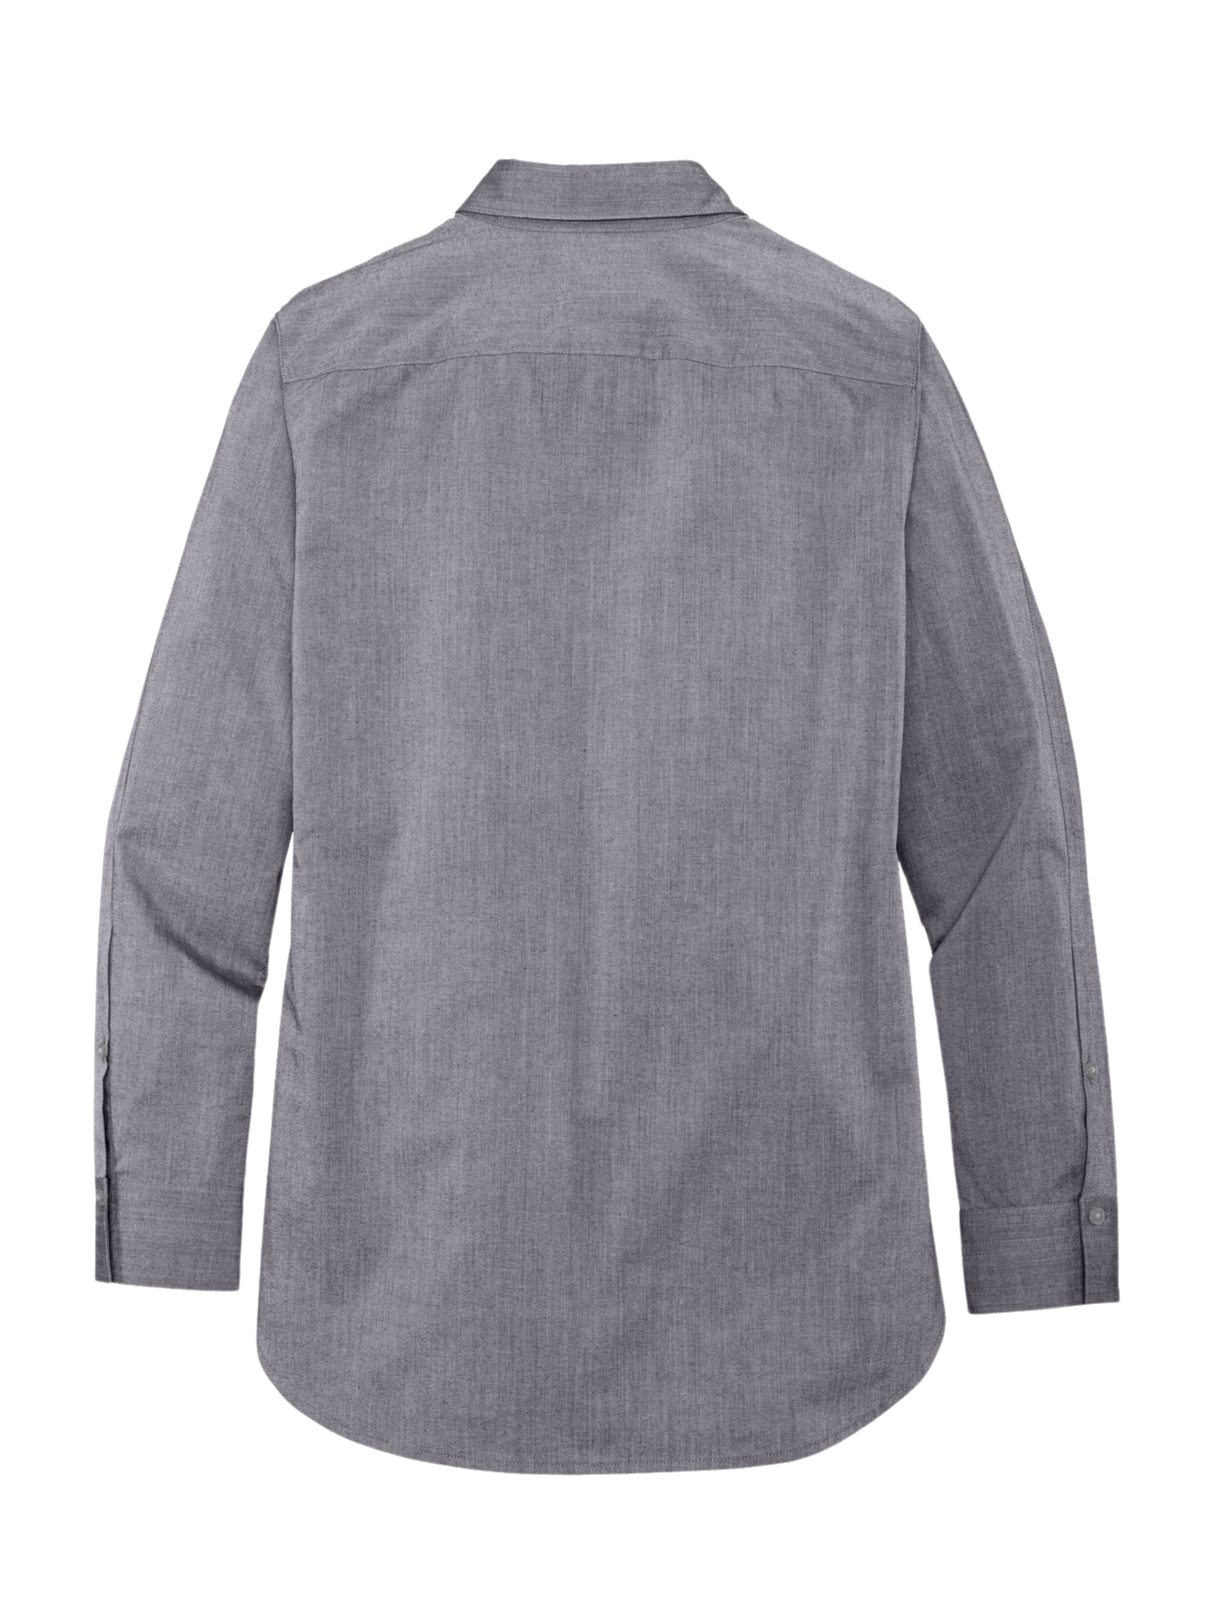 OHS Logo - Ladies Commuter Woven Tunic